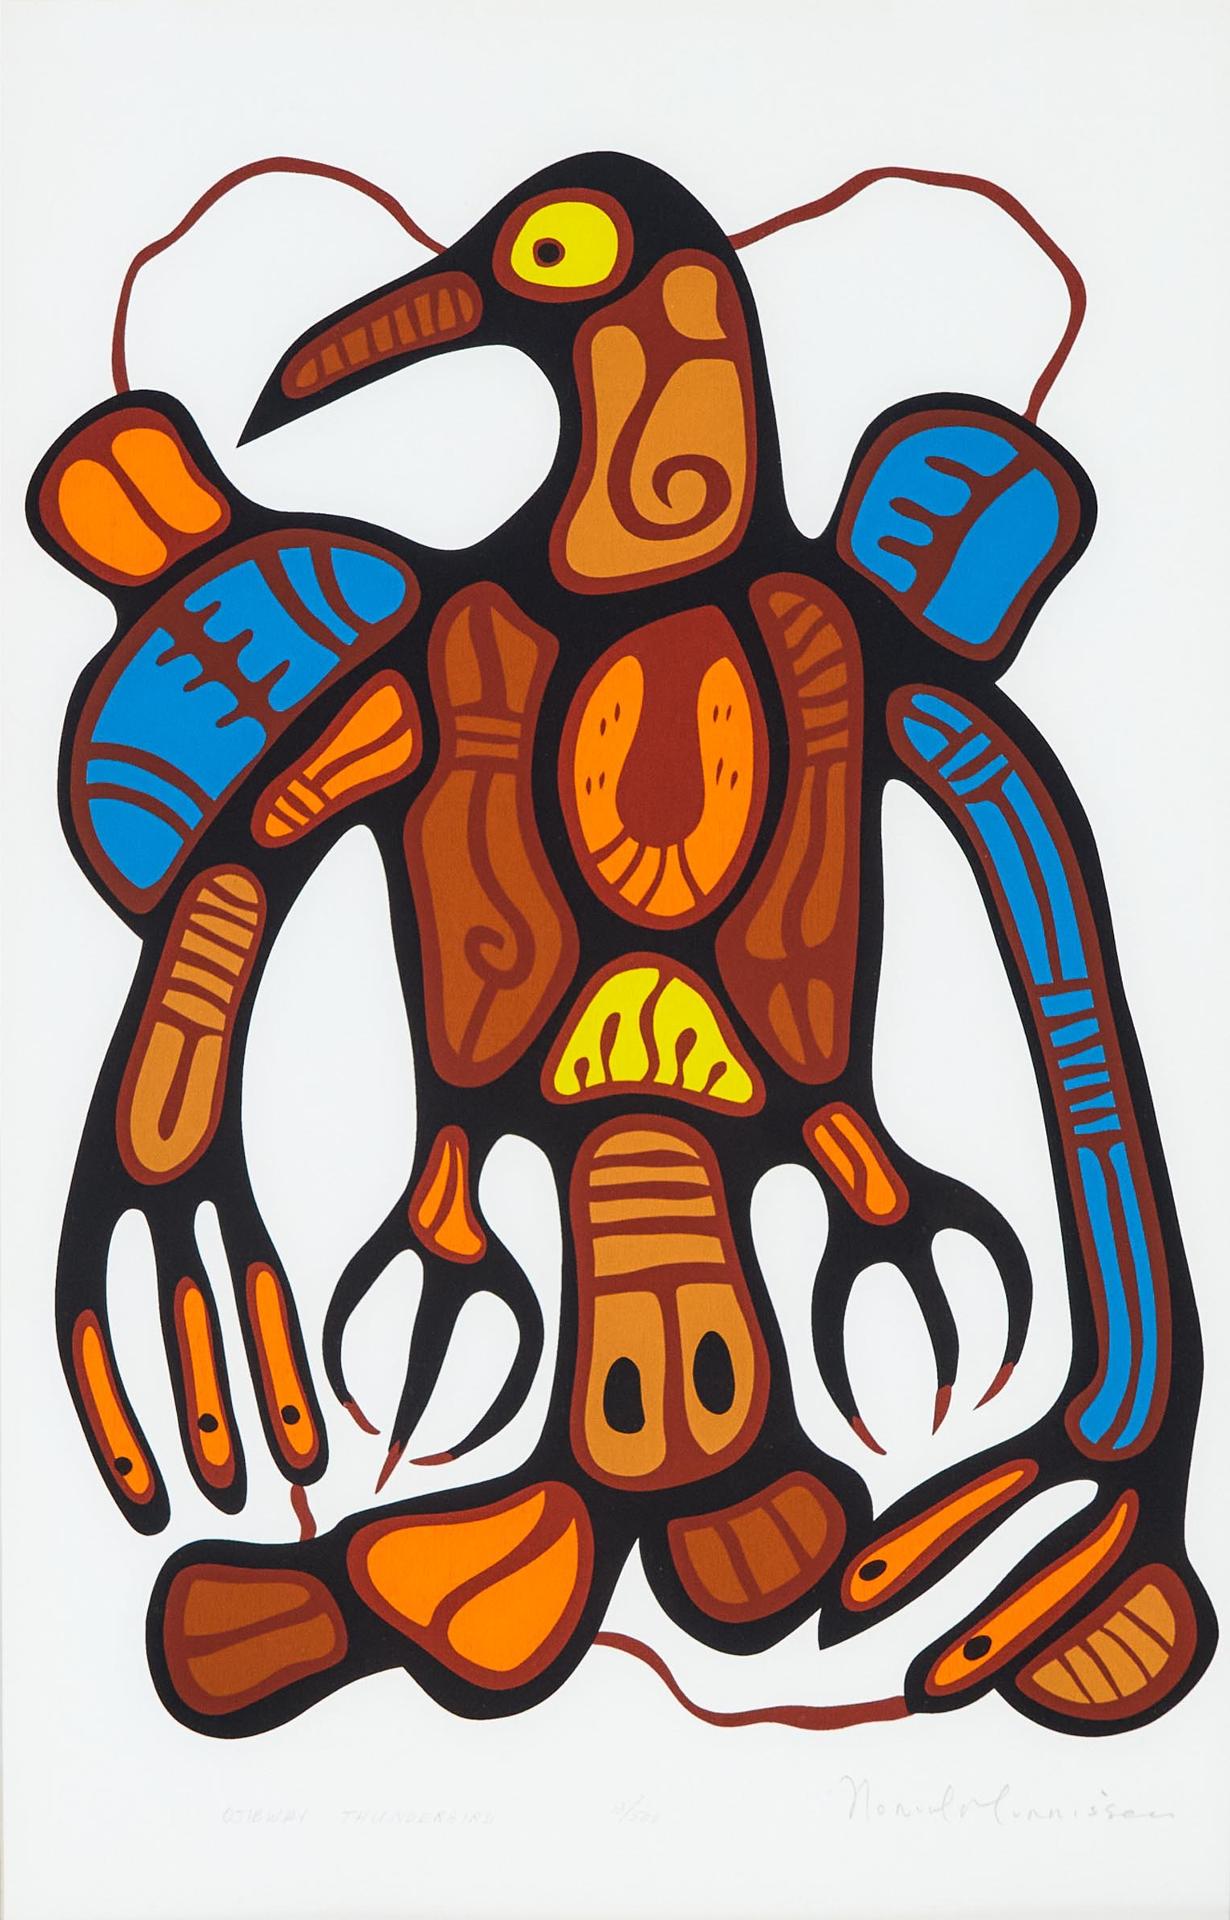 Norval H. Morrisseau (1931-2007) - Ojibway Thunderbird